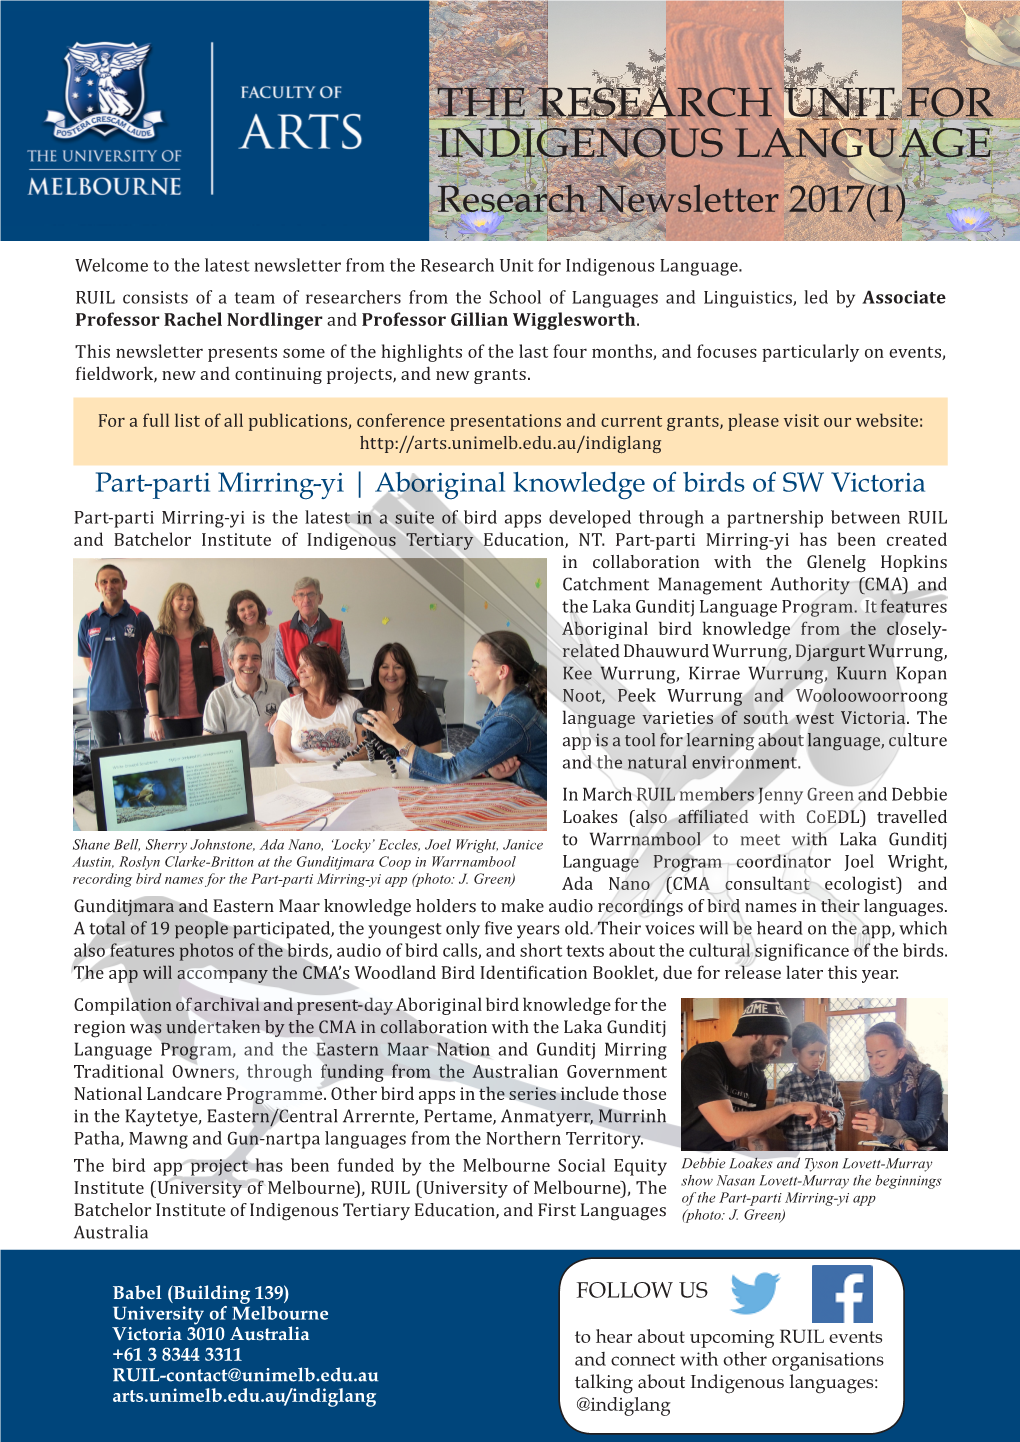 THE RESEARCH UNIT for INDIGENOUS LANGUAGE Research Newsletter 2017(1)